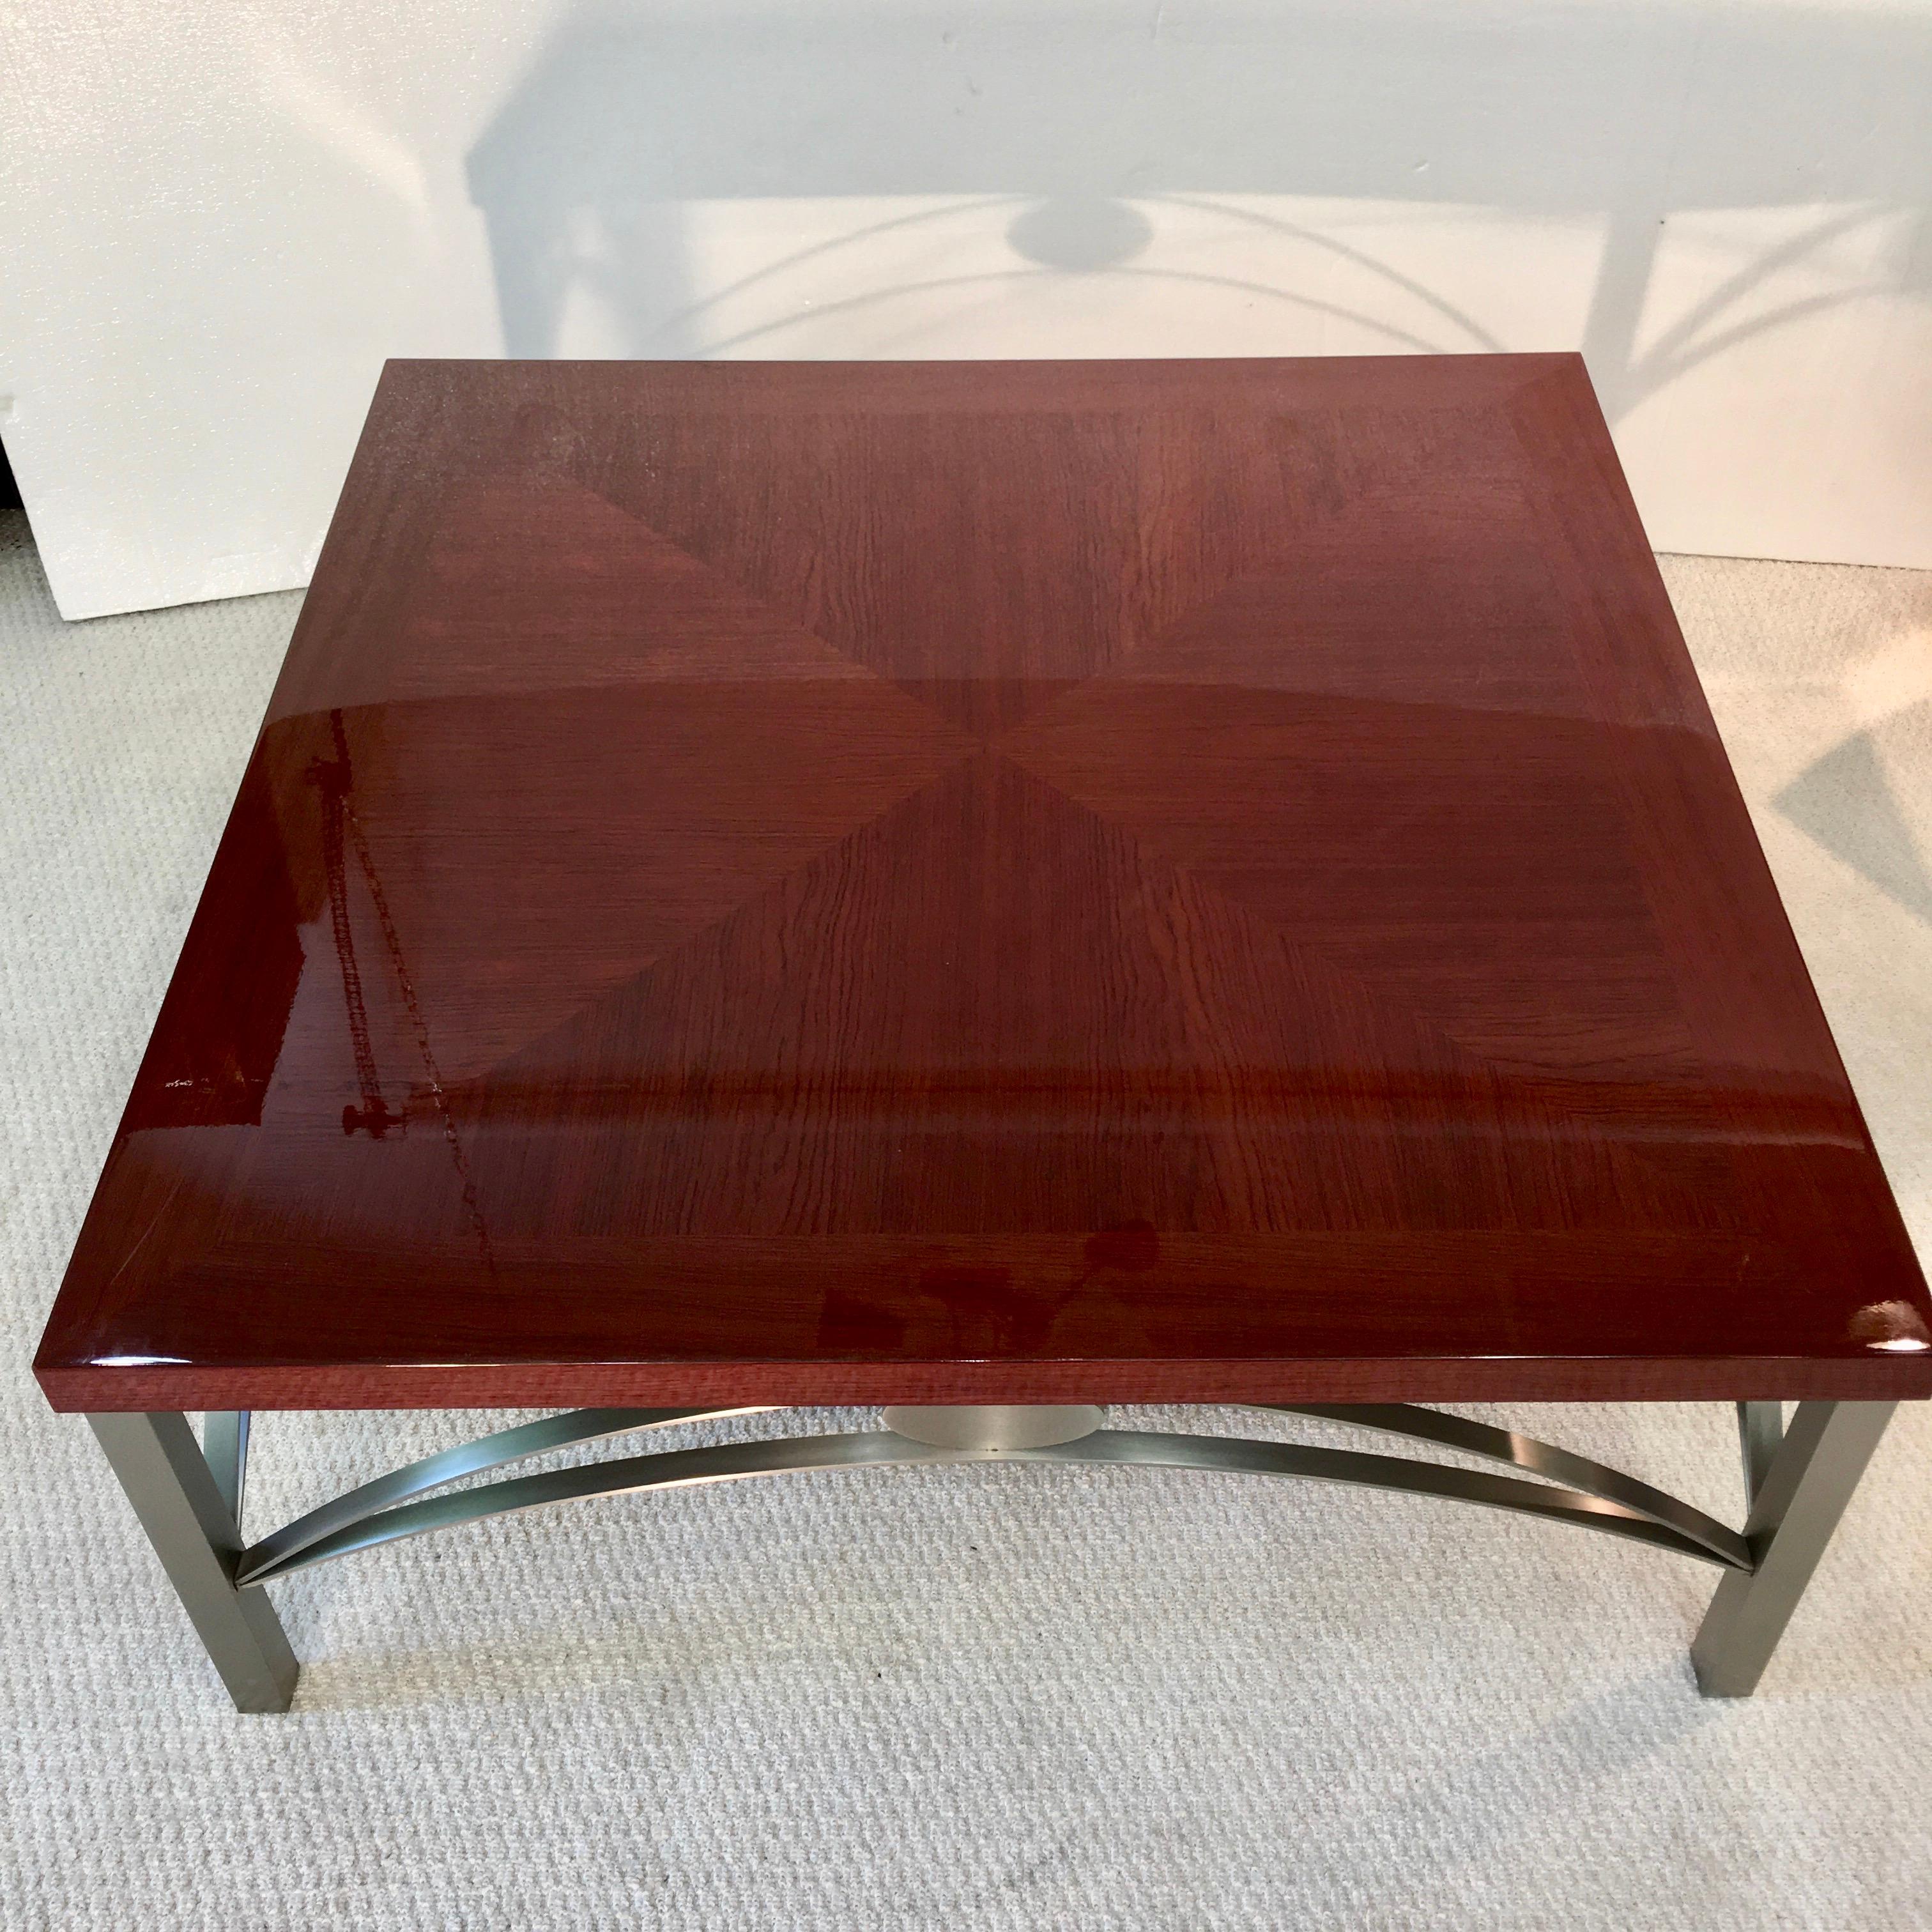 Designer Square Cocktail Table Padauk and Stainless Steel In Good Condition For Sale In Hanover, MA